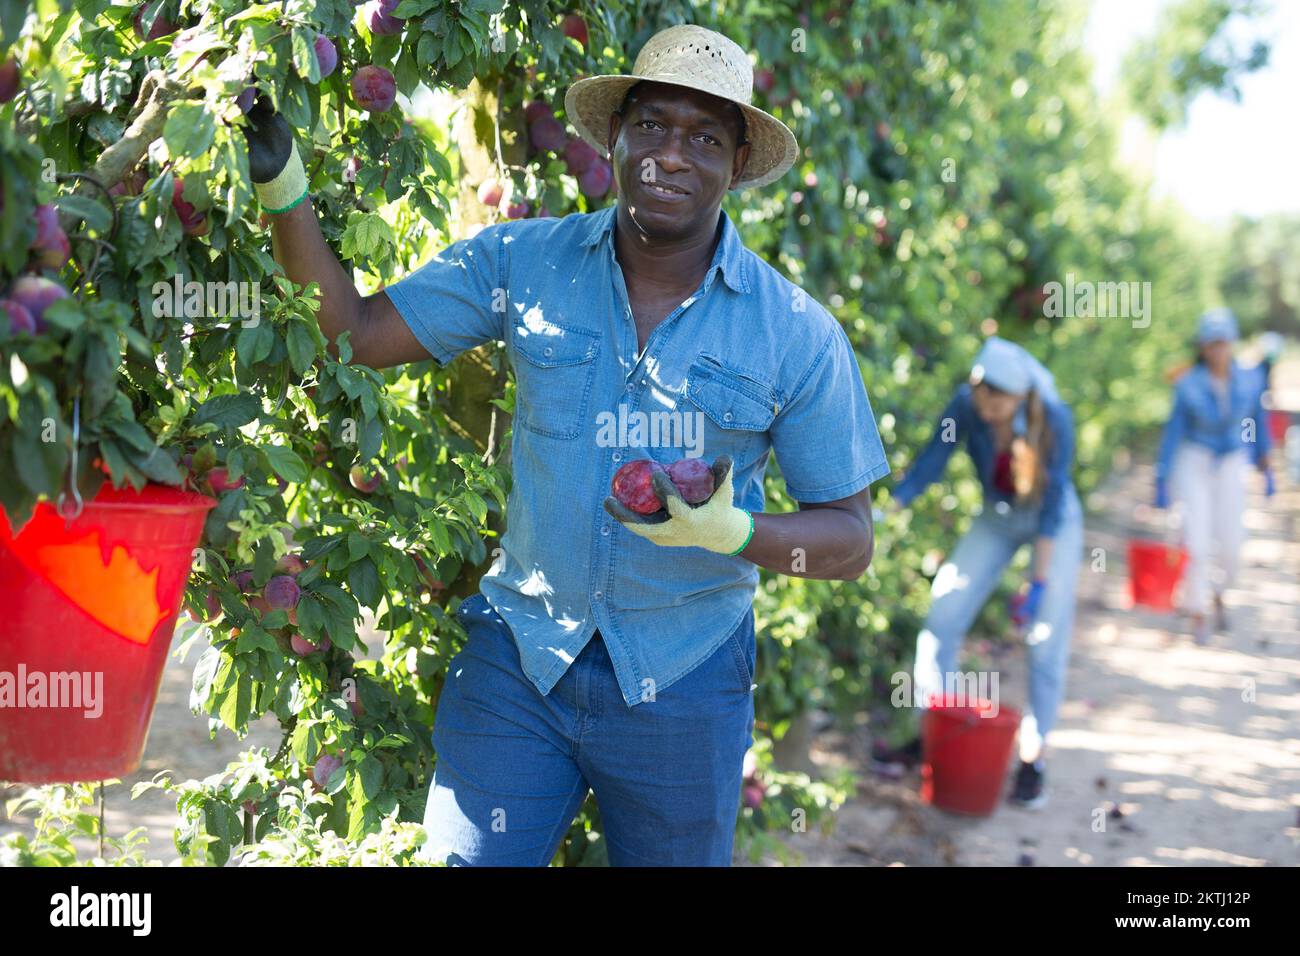 African male gardener picking plums from tree Stock Photo